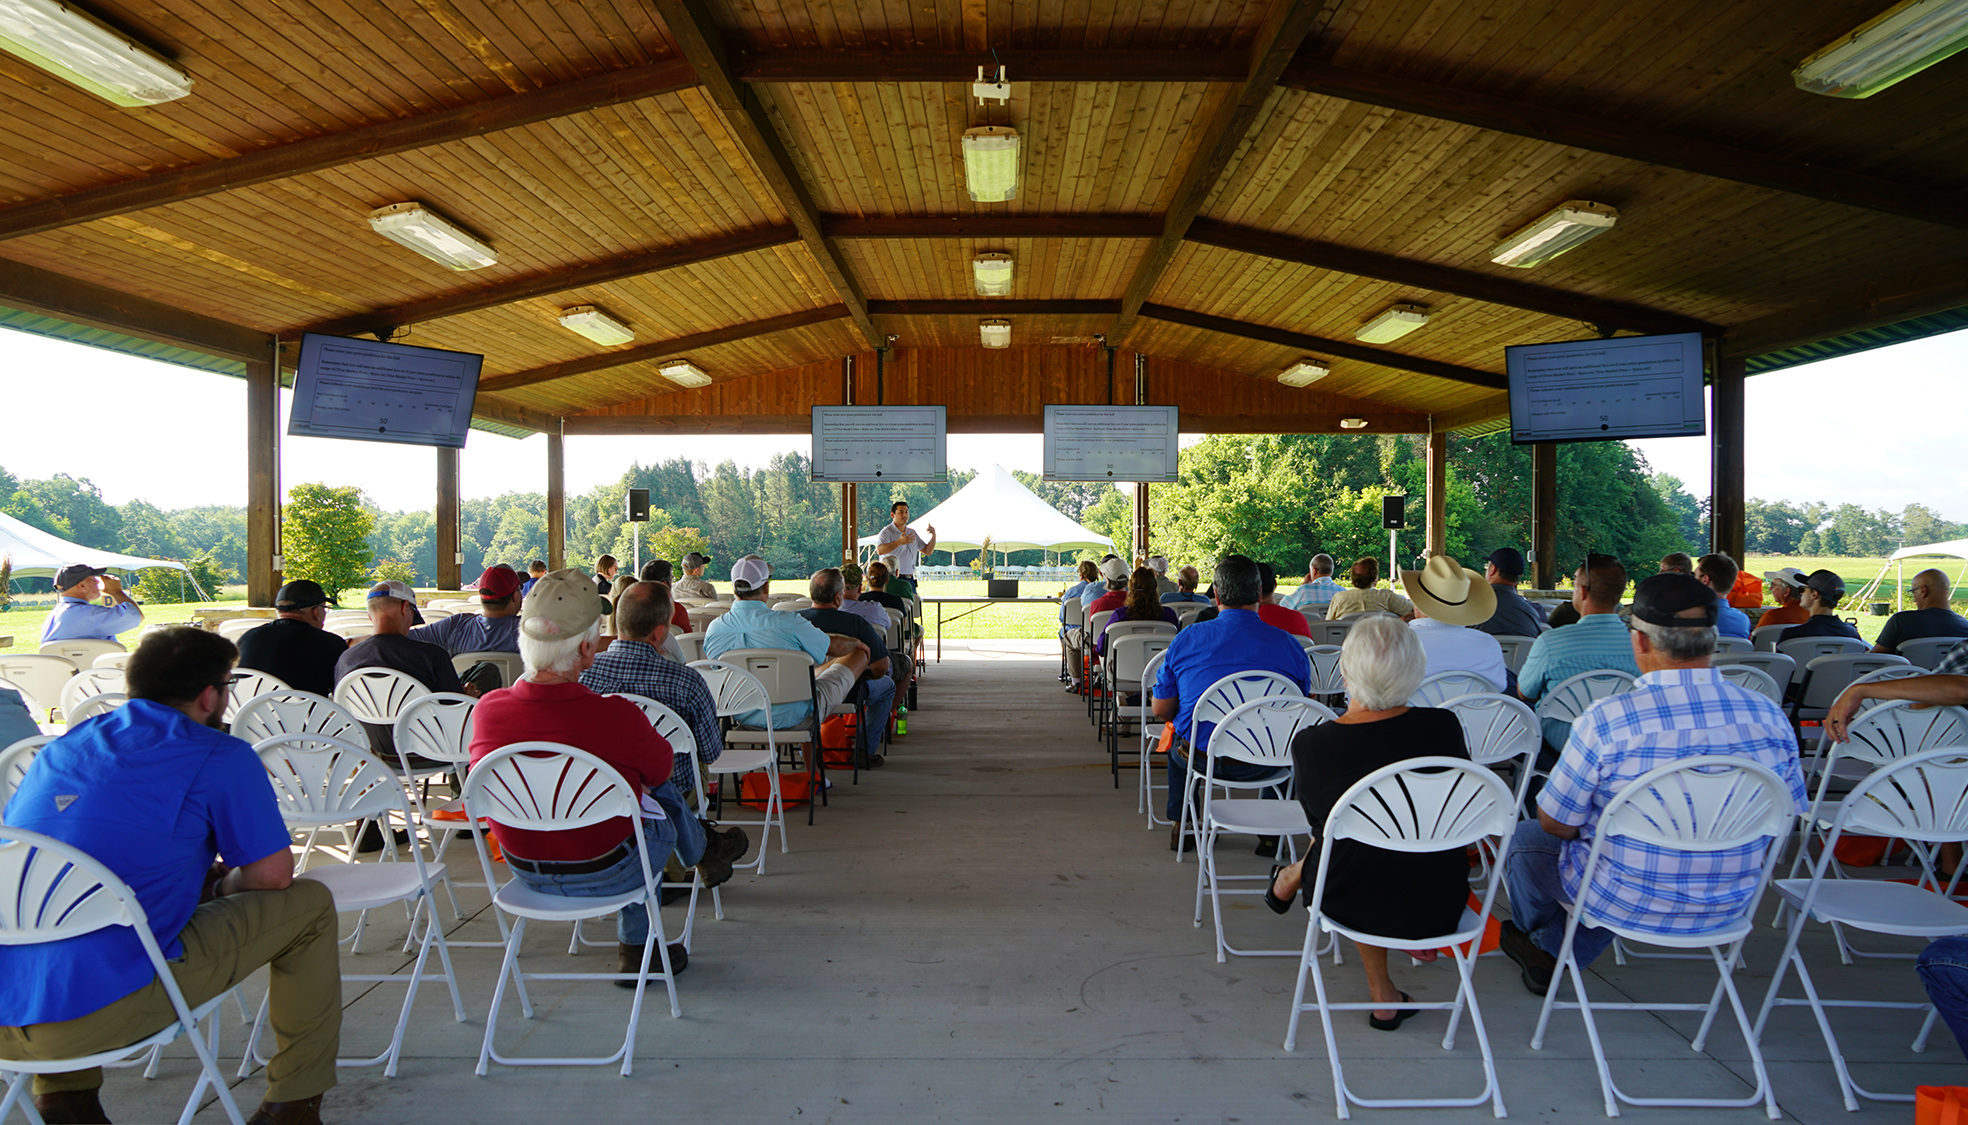 Attendees attend a presentation at the Program Shelter on the Plateau AgResearch and Education Center.